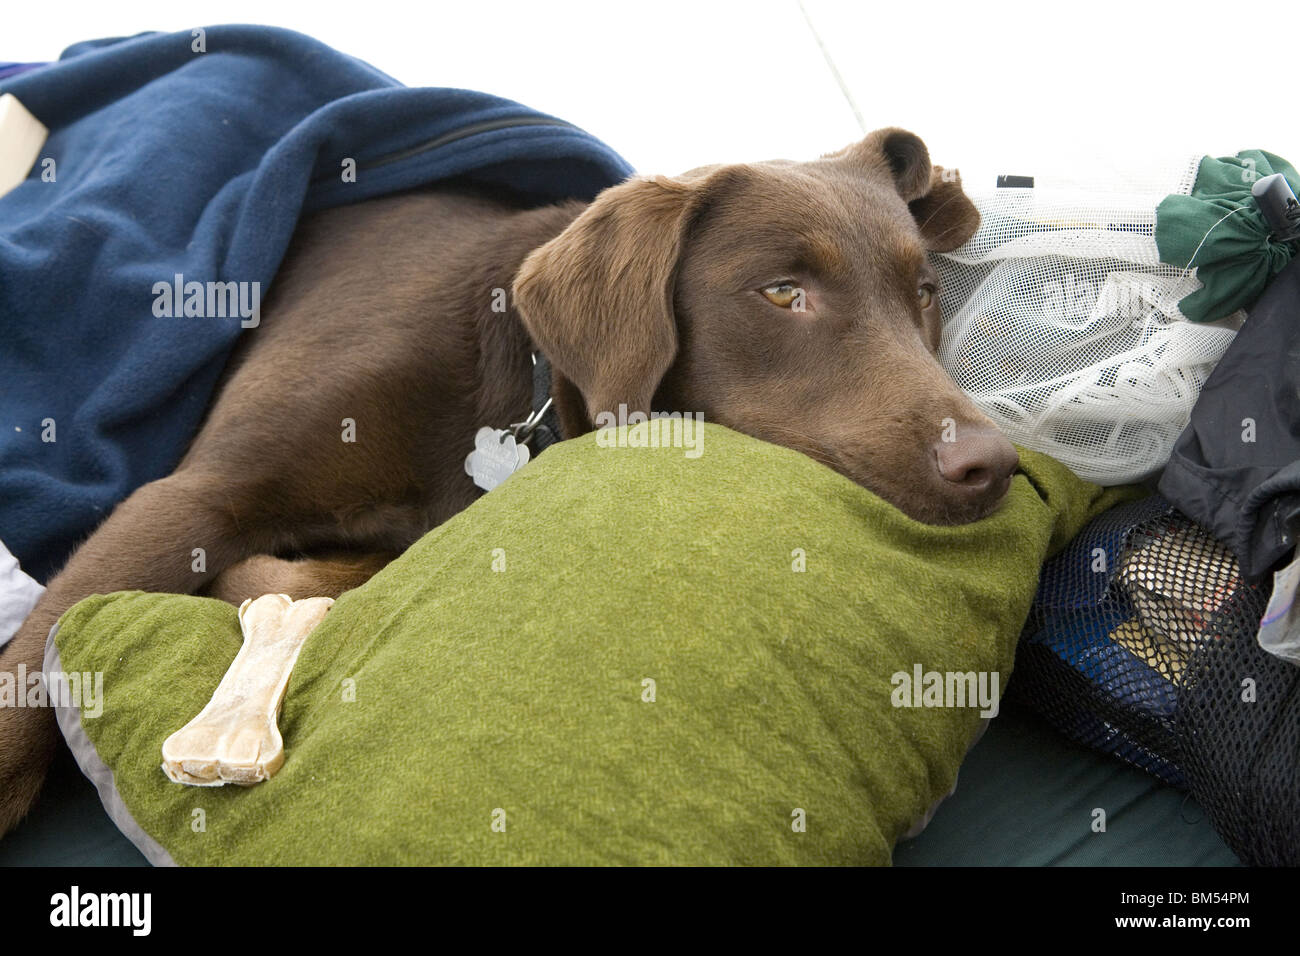 A chocolate Labrador puppy wrapped up in sleeping bags inside a tent. Stock Photo